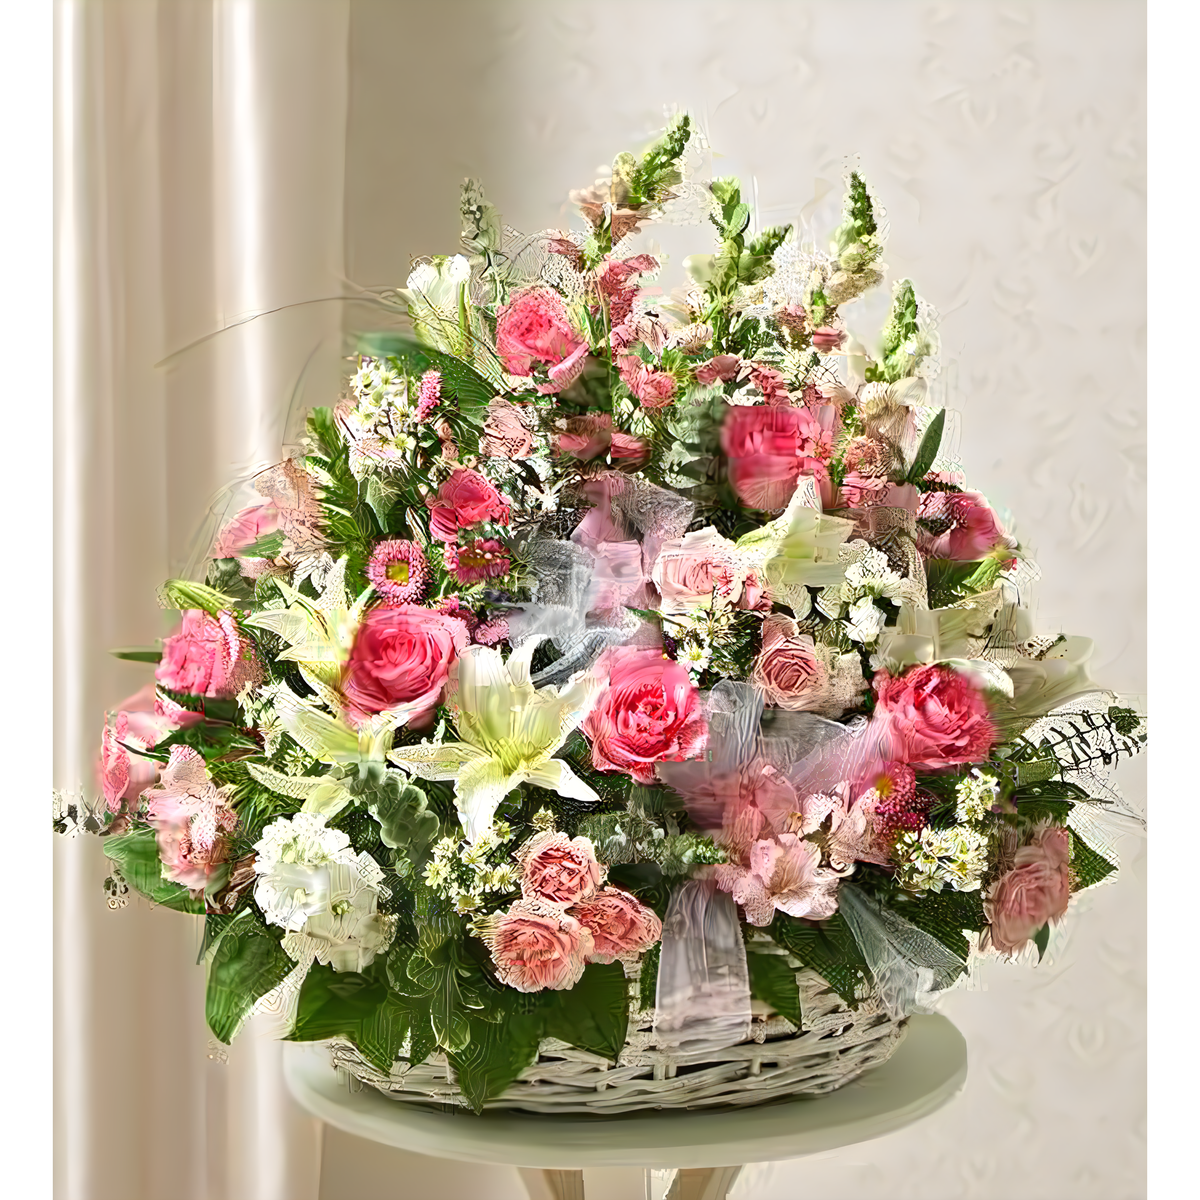 Manhattan Flower Delivery - Pink and White Sympathy Arrangement in Basket - Funeral &gt; For the Service